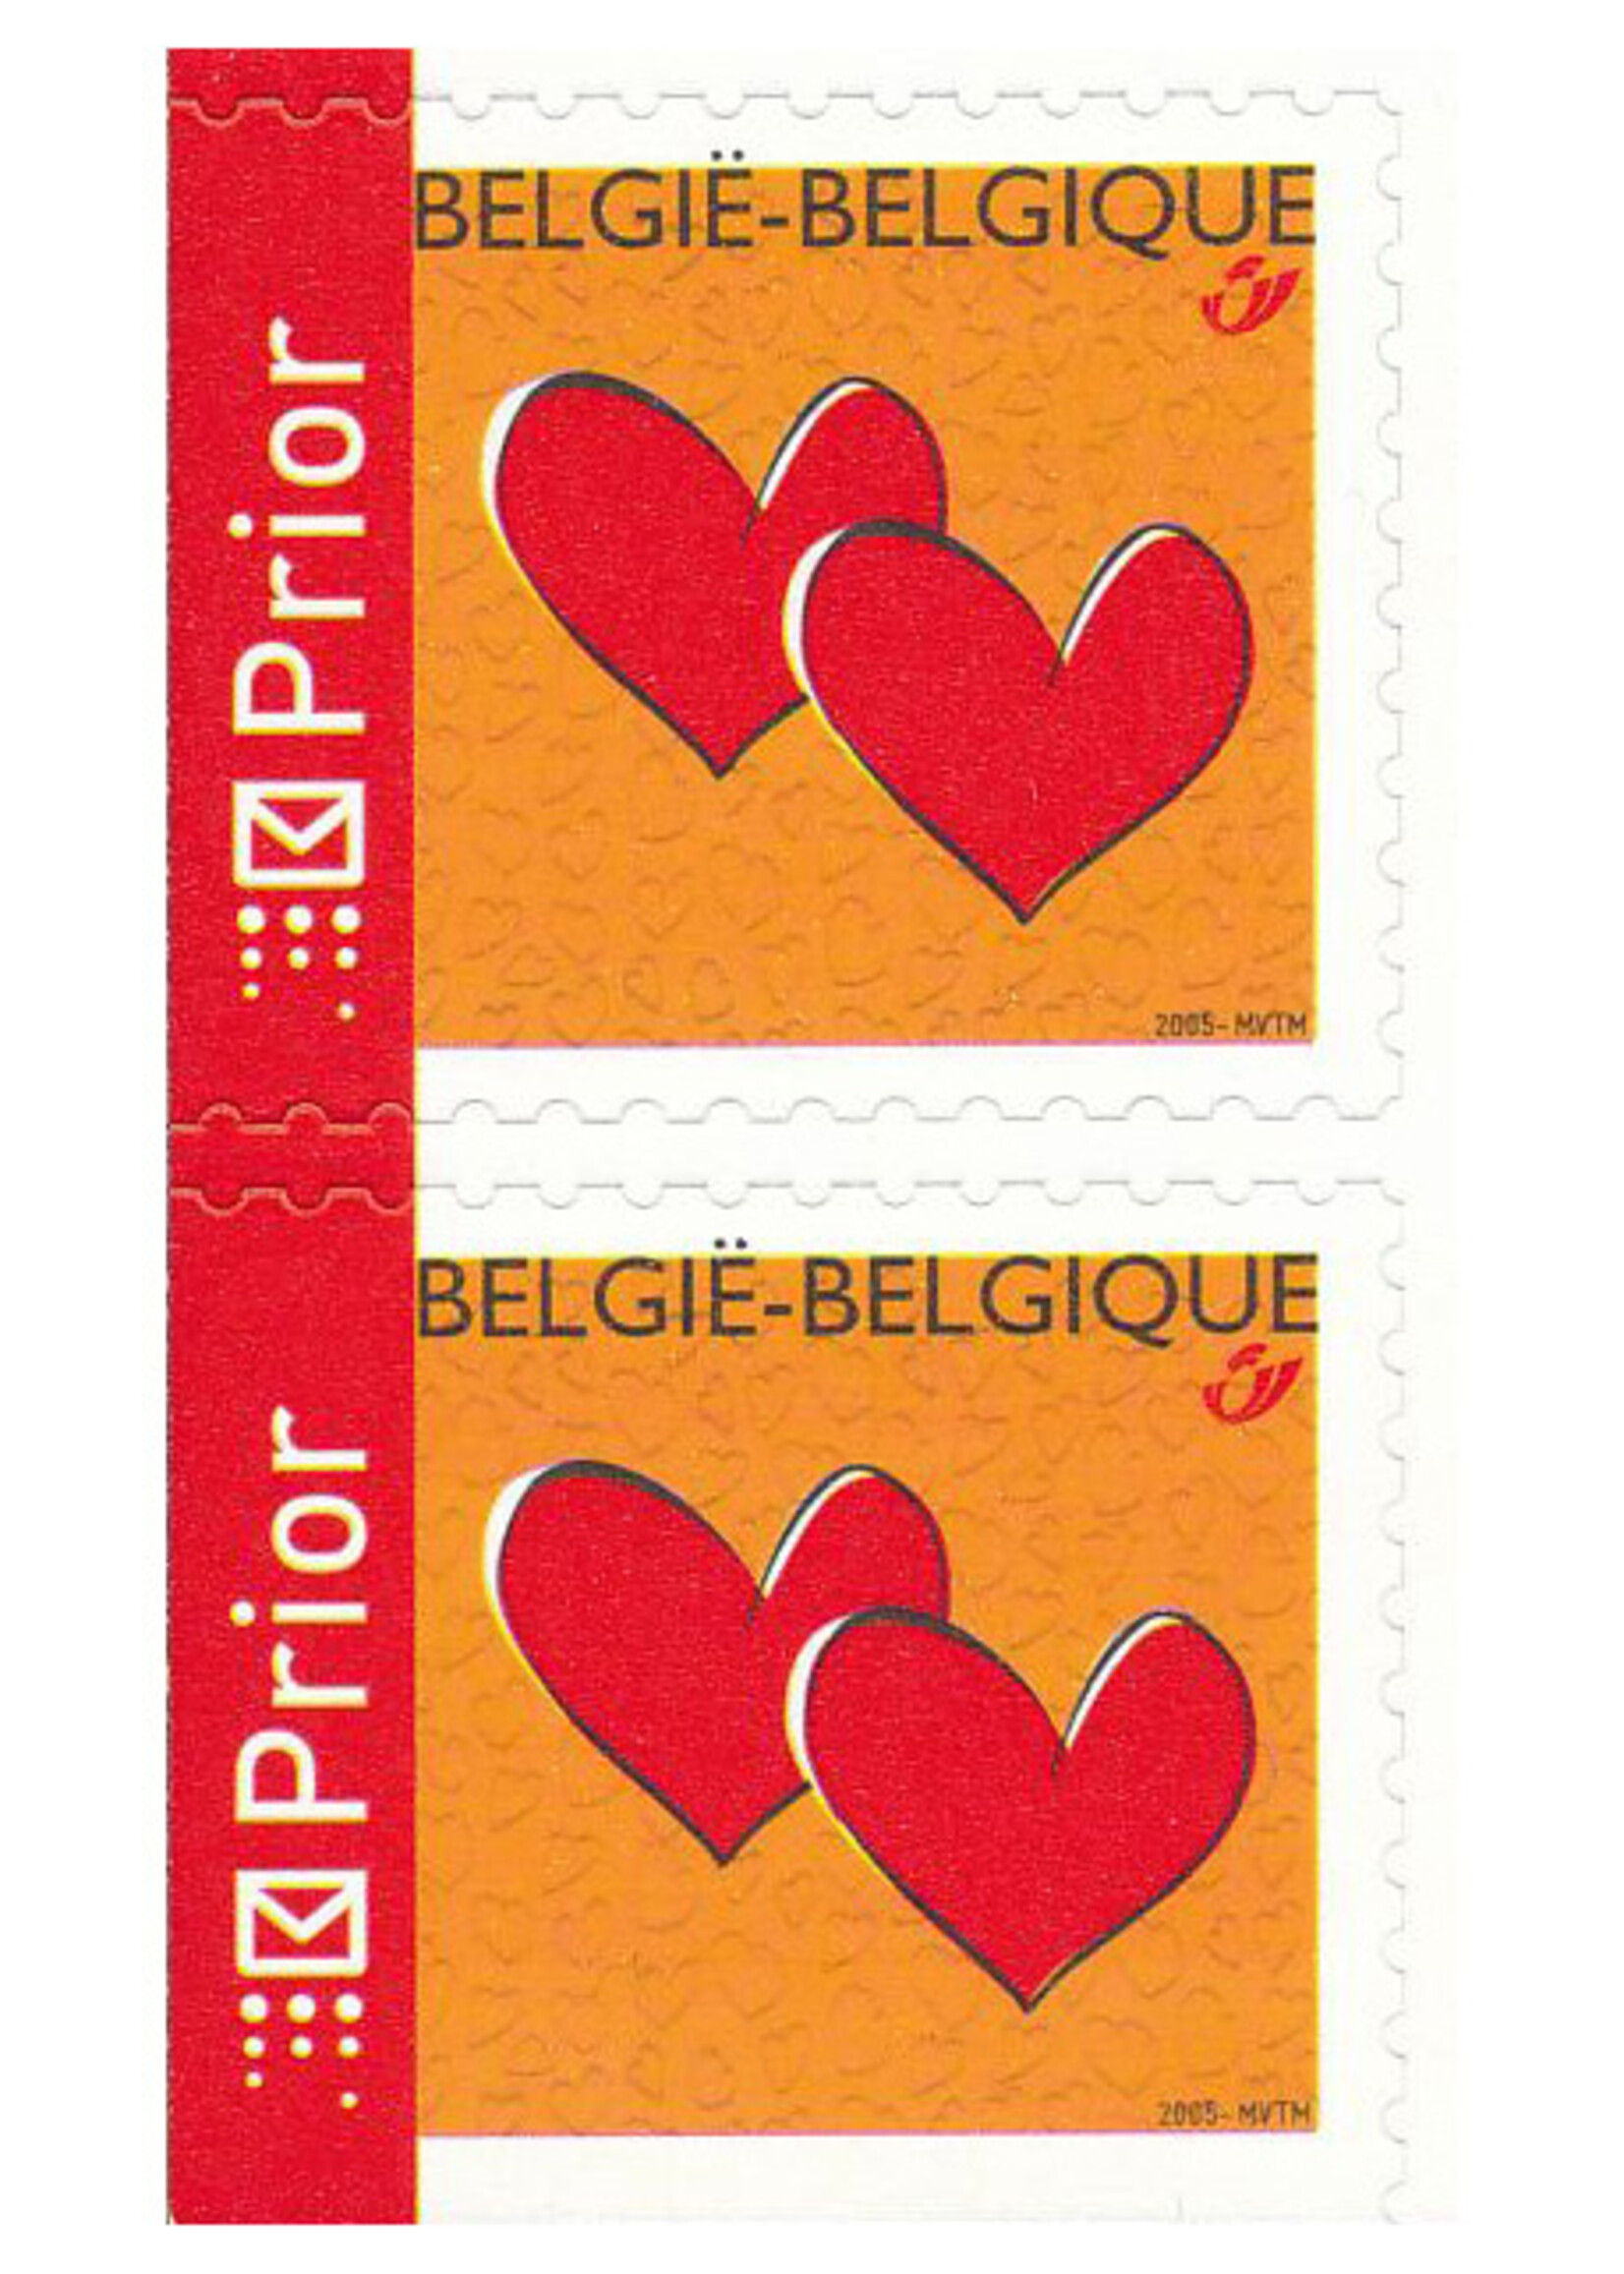 Theme Wedding - Booklet with 10 self-adhesive stamps - Rate 1, Belgium